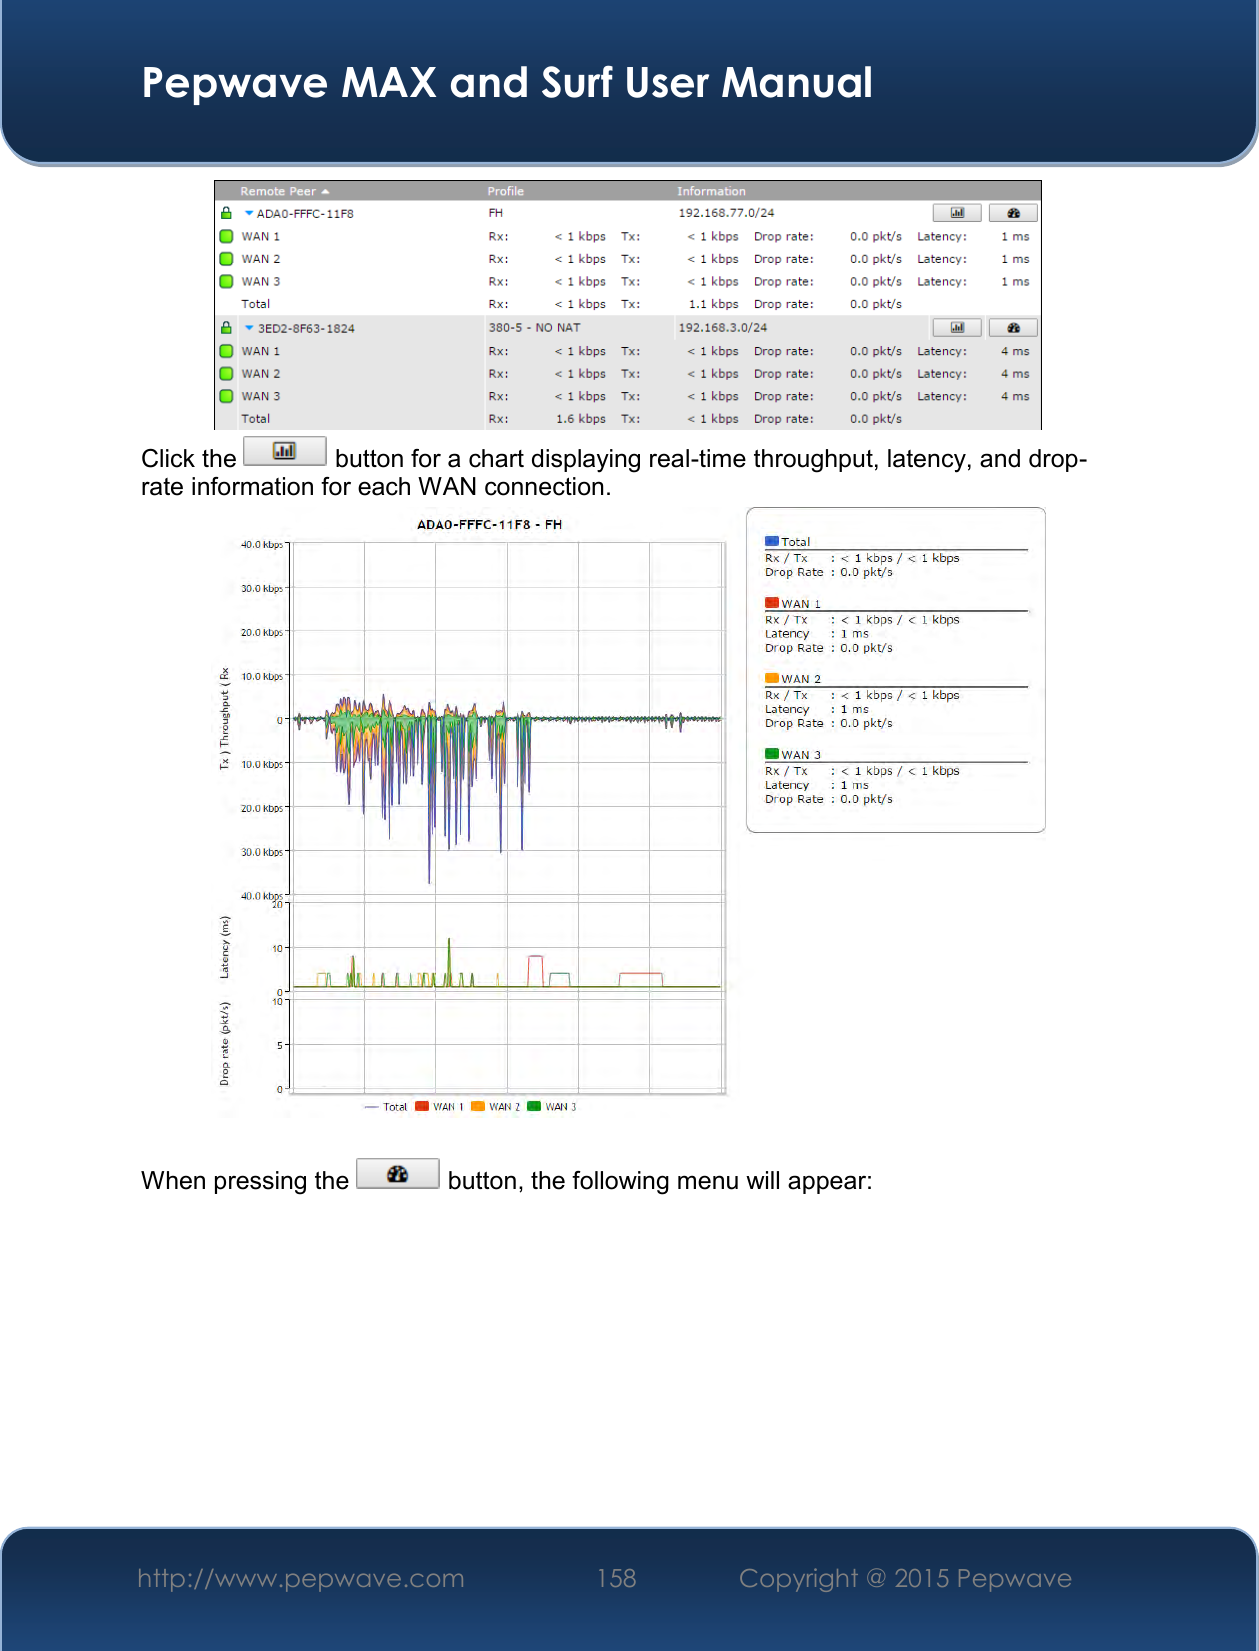  Pepwave MAX and Surf User Manual http://www.pepwave.com 158   Copyright @ 2015 Pepwave    Click the   button for a chart displaying real-time throughput, latency, and drop-rate information for each WAN connection.   When pressing the   button, the following menu will appear:  